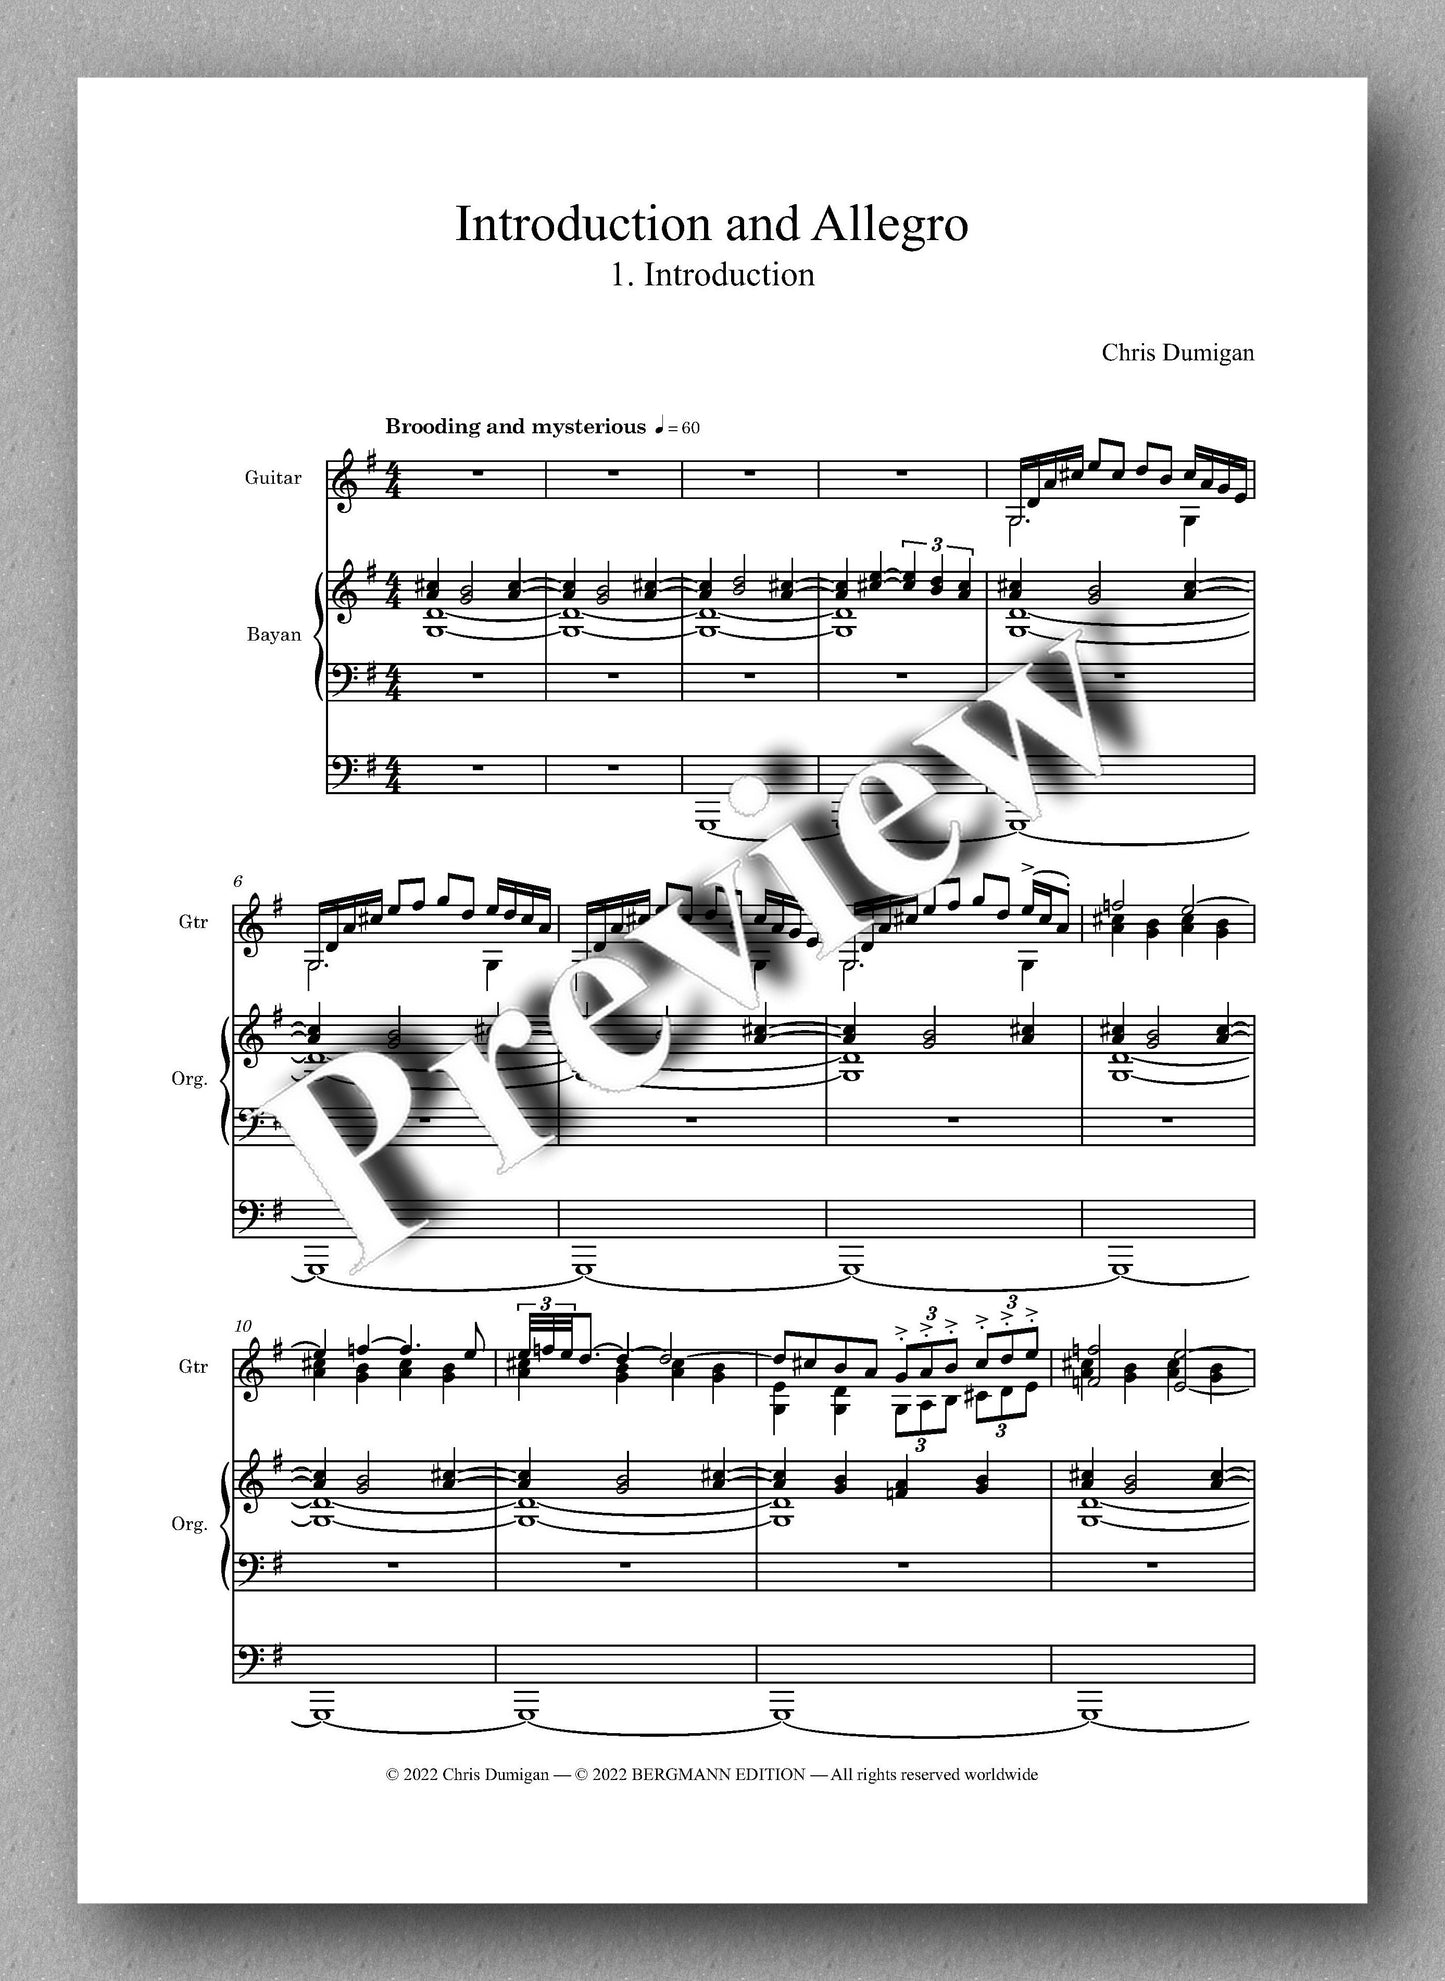 Chris Dumigan, Introduction and Allegro - preview of the music score 1